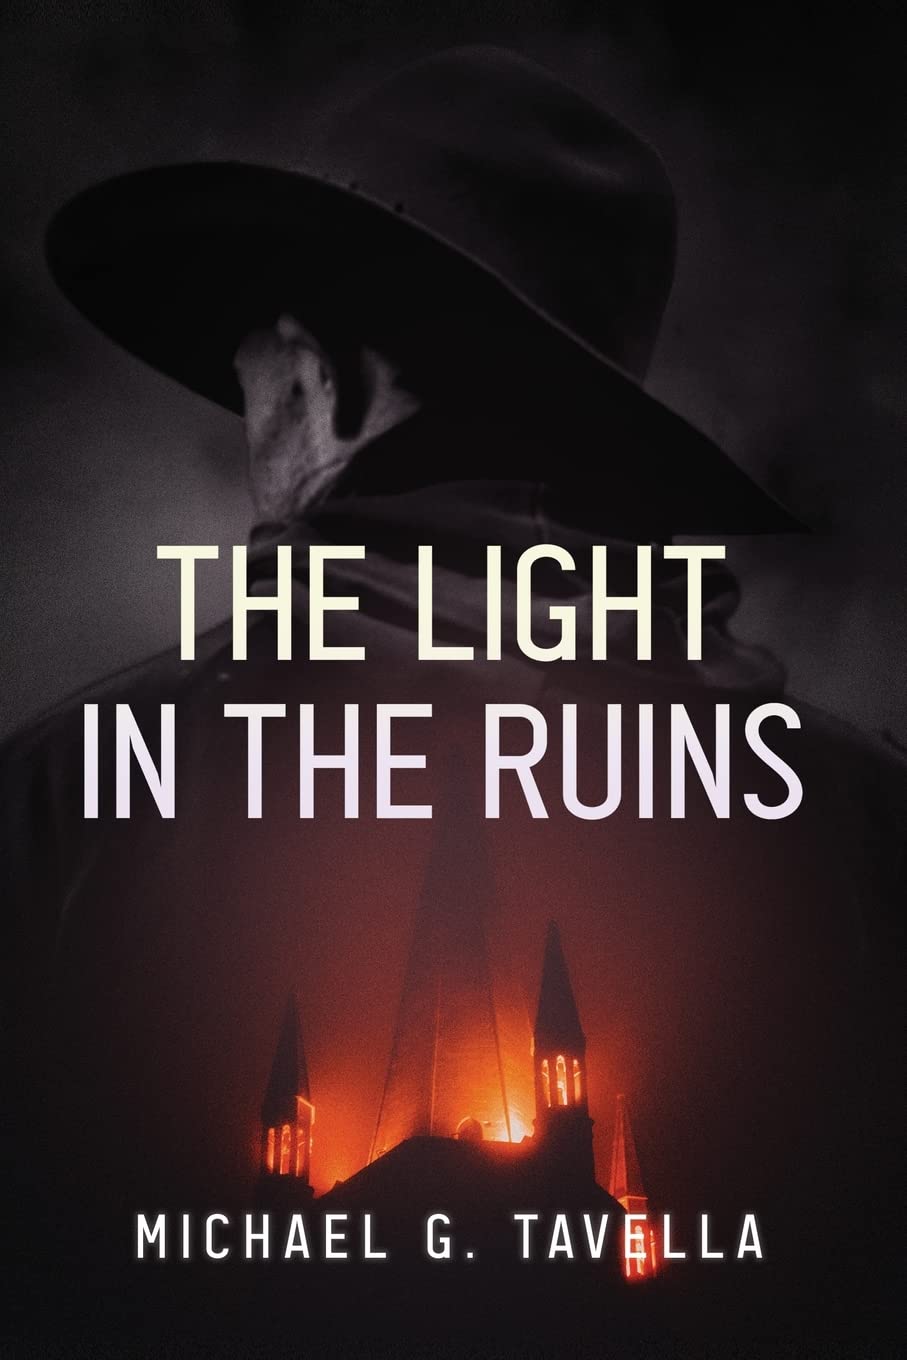 Author's Tranquility Press Presents Michael Tavella's Gripping New Book "The Light in the Ruins"